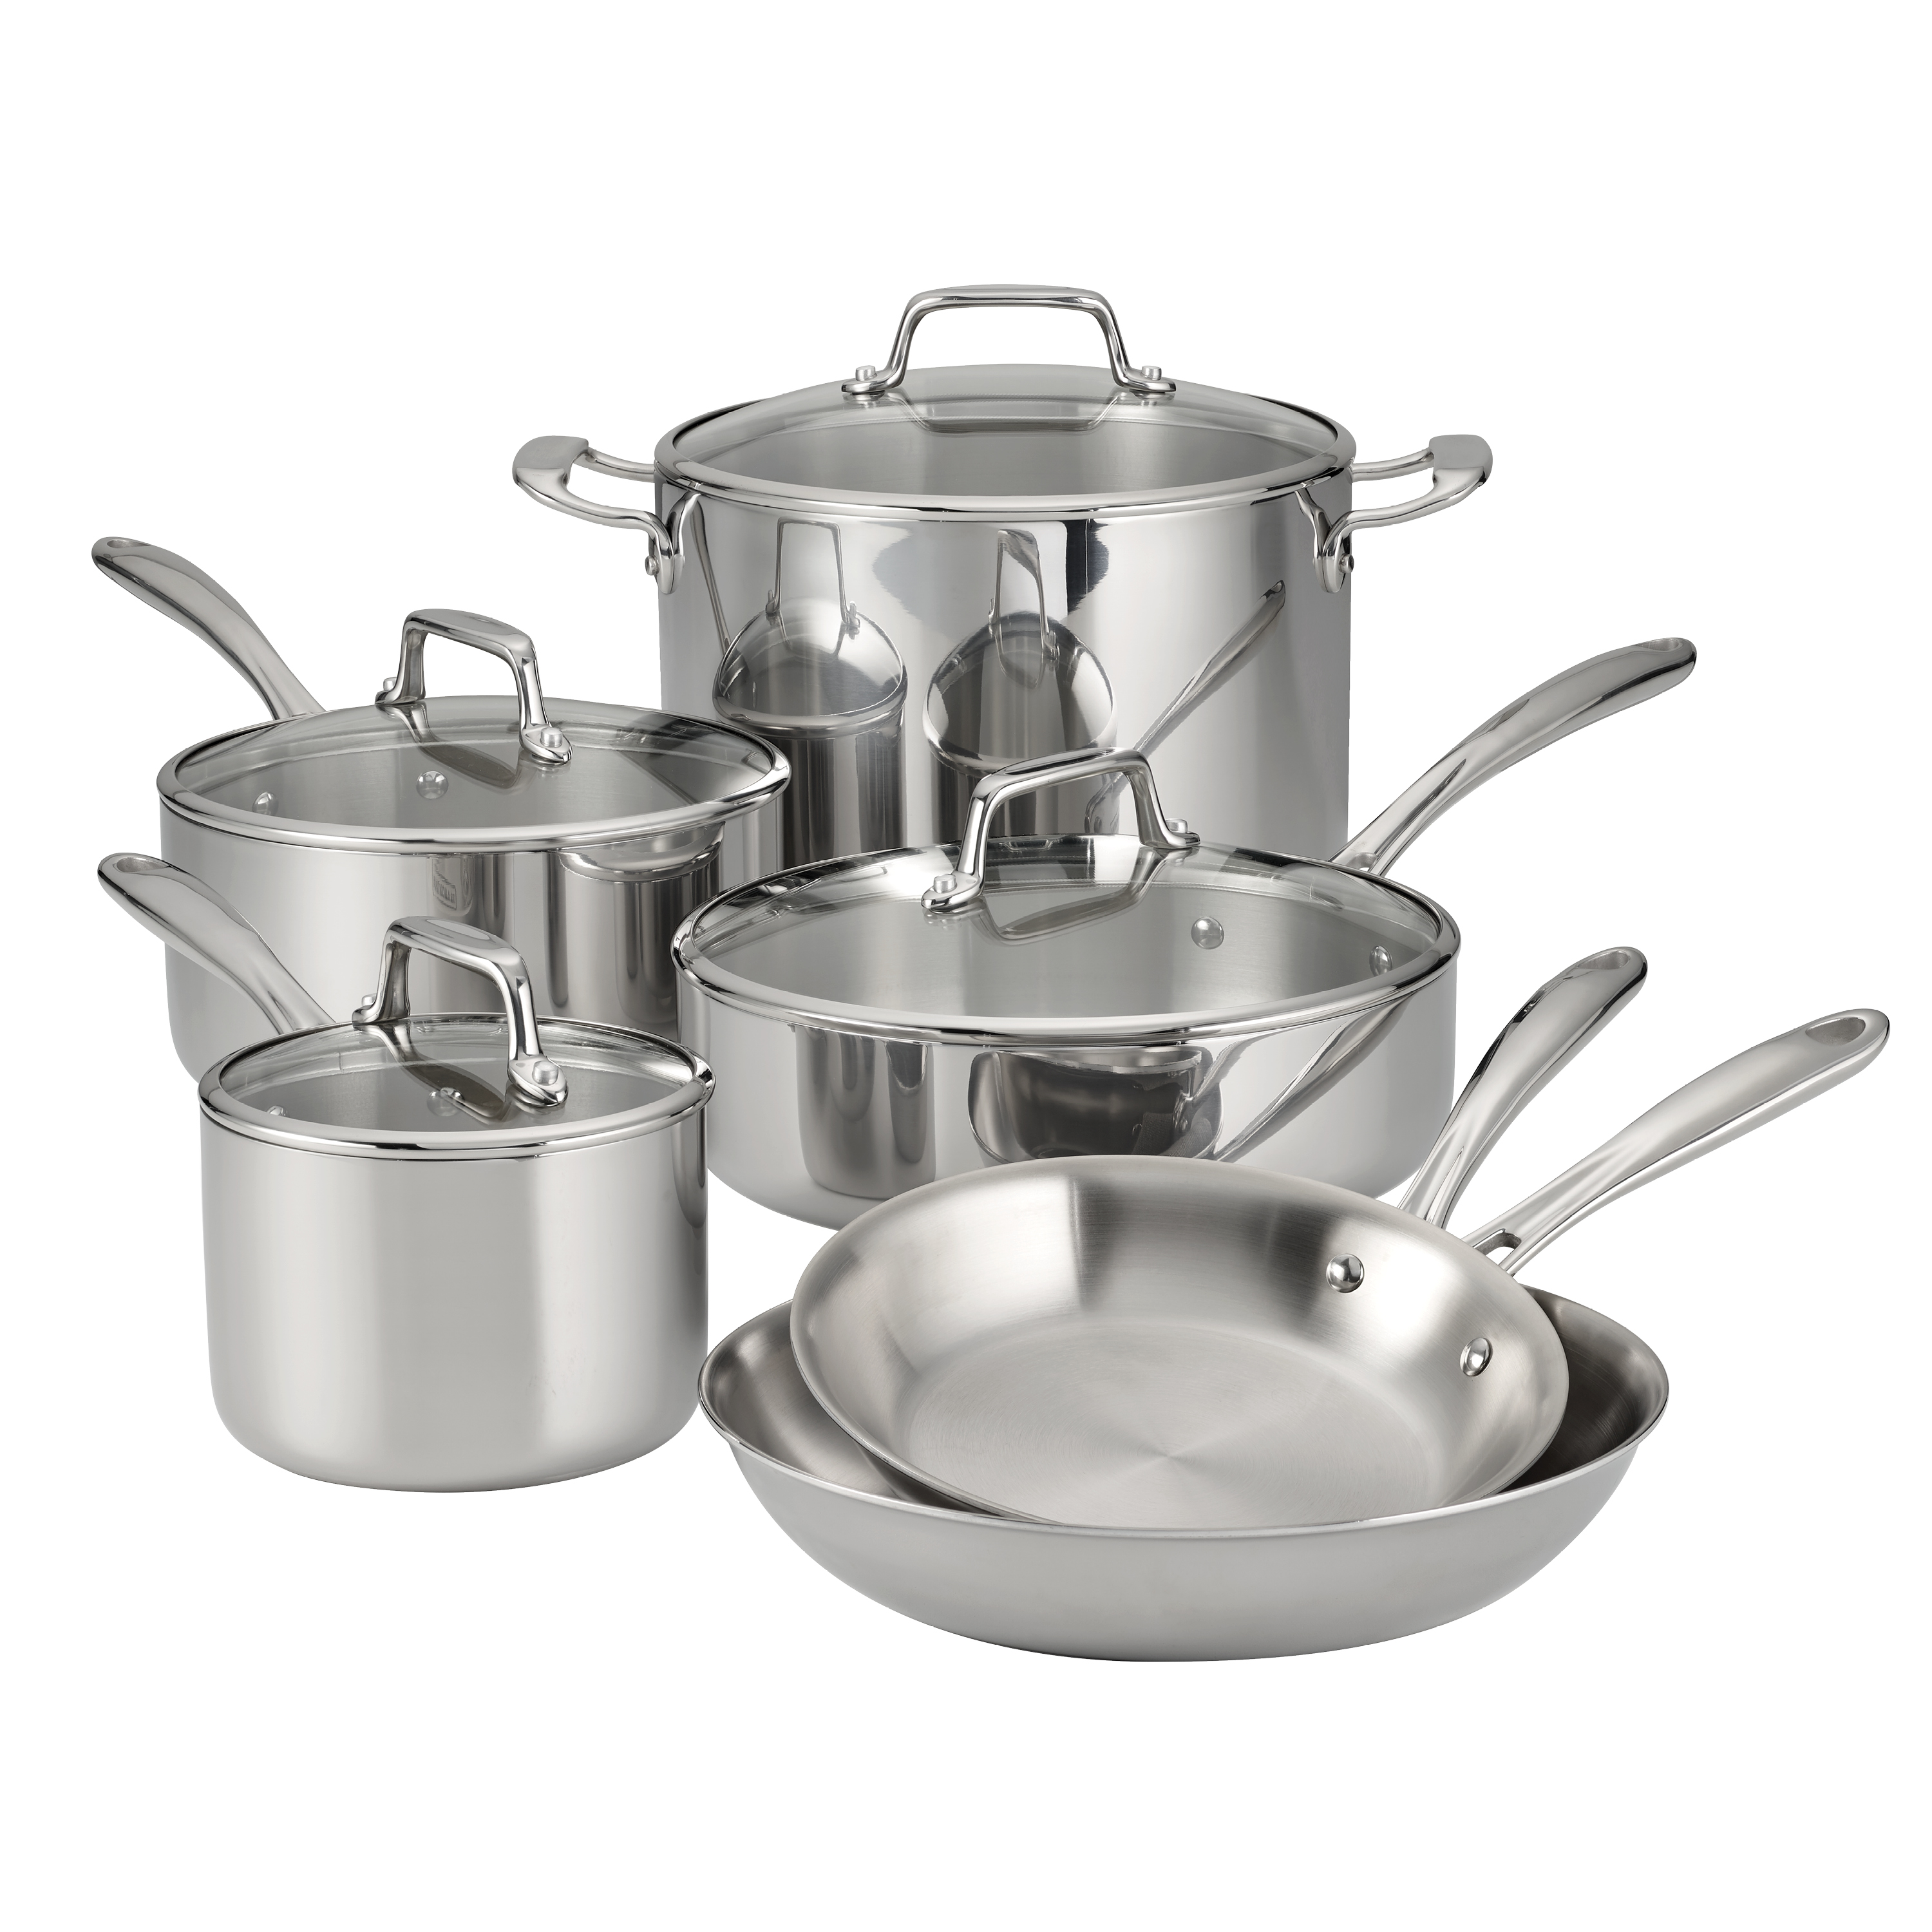 Tramontina 10-Piece Tri-Ply Clad Stainless Steel Cookware Set, with Glass Lids - image 1 of 16